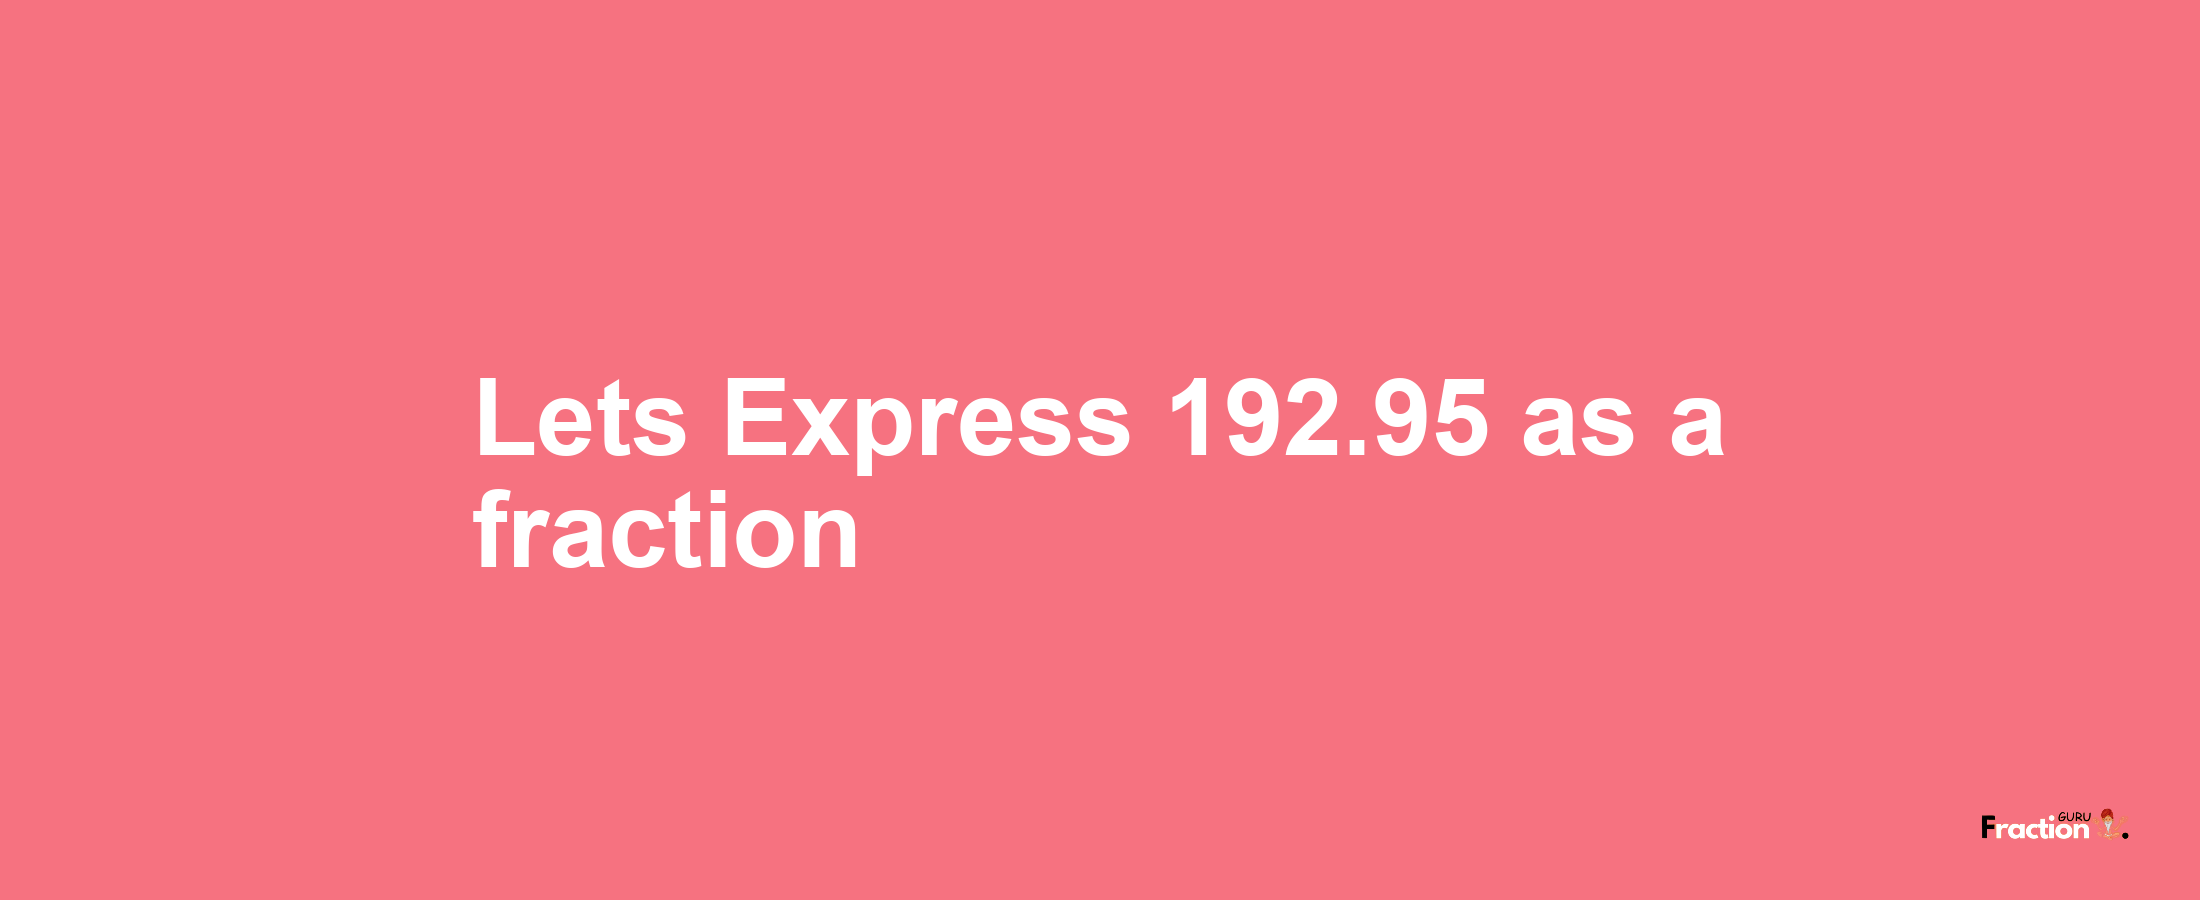 Lets Express 192.95 as afraction